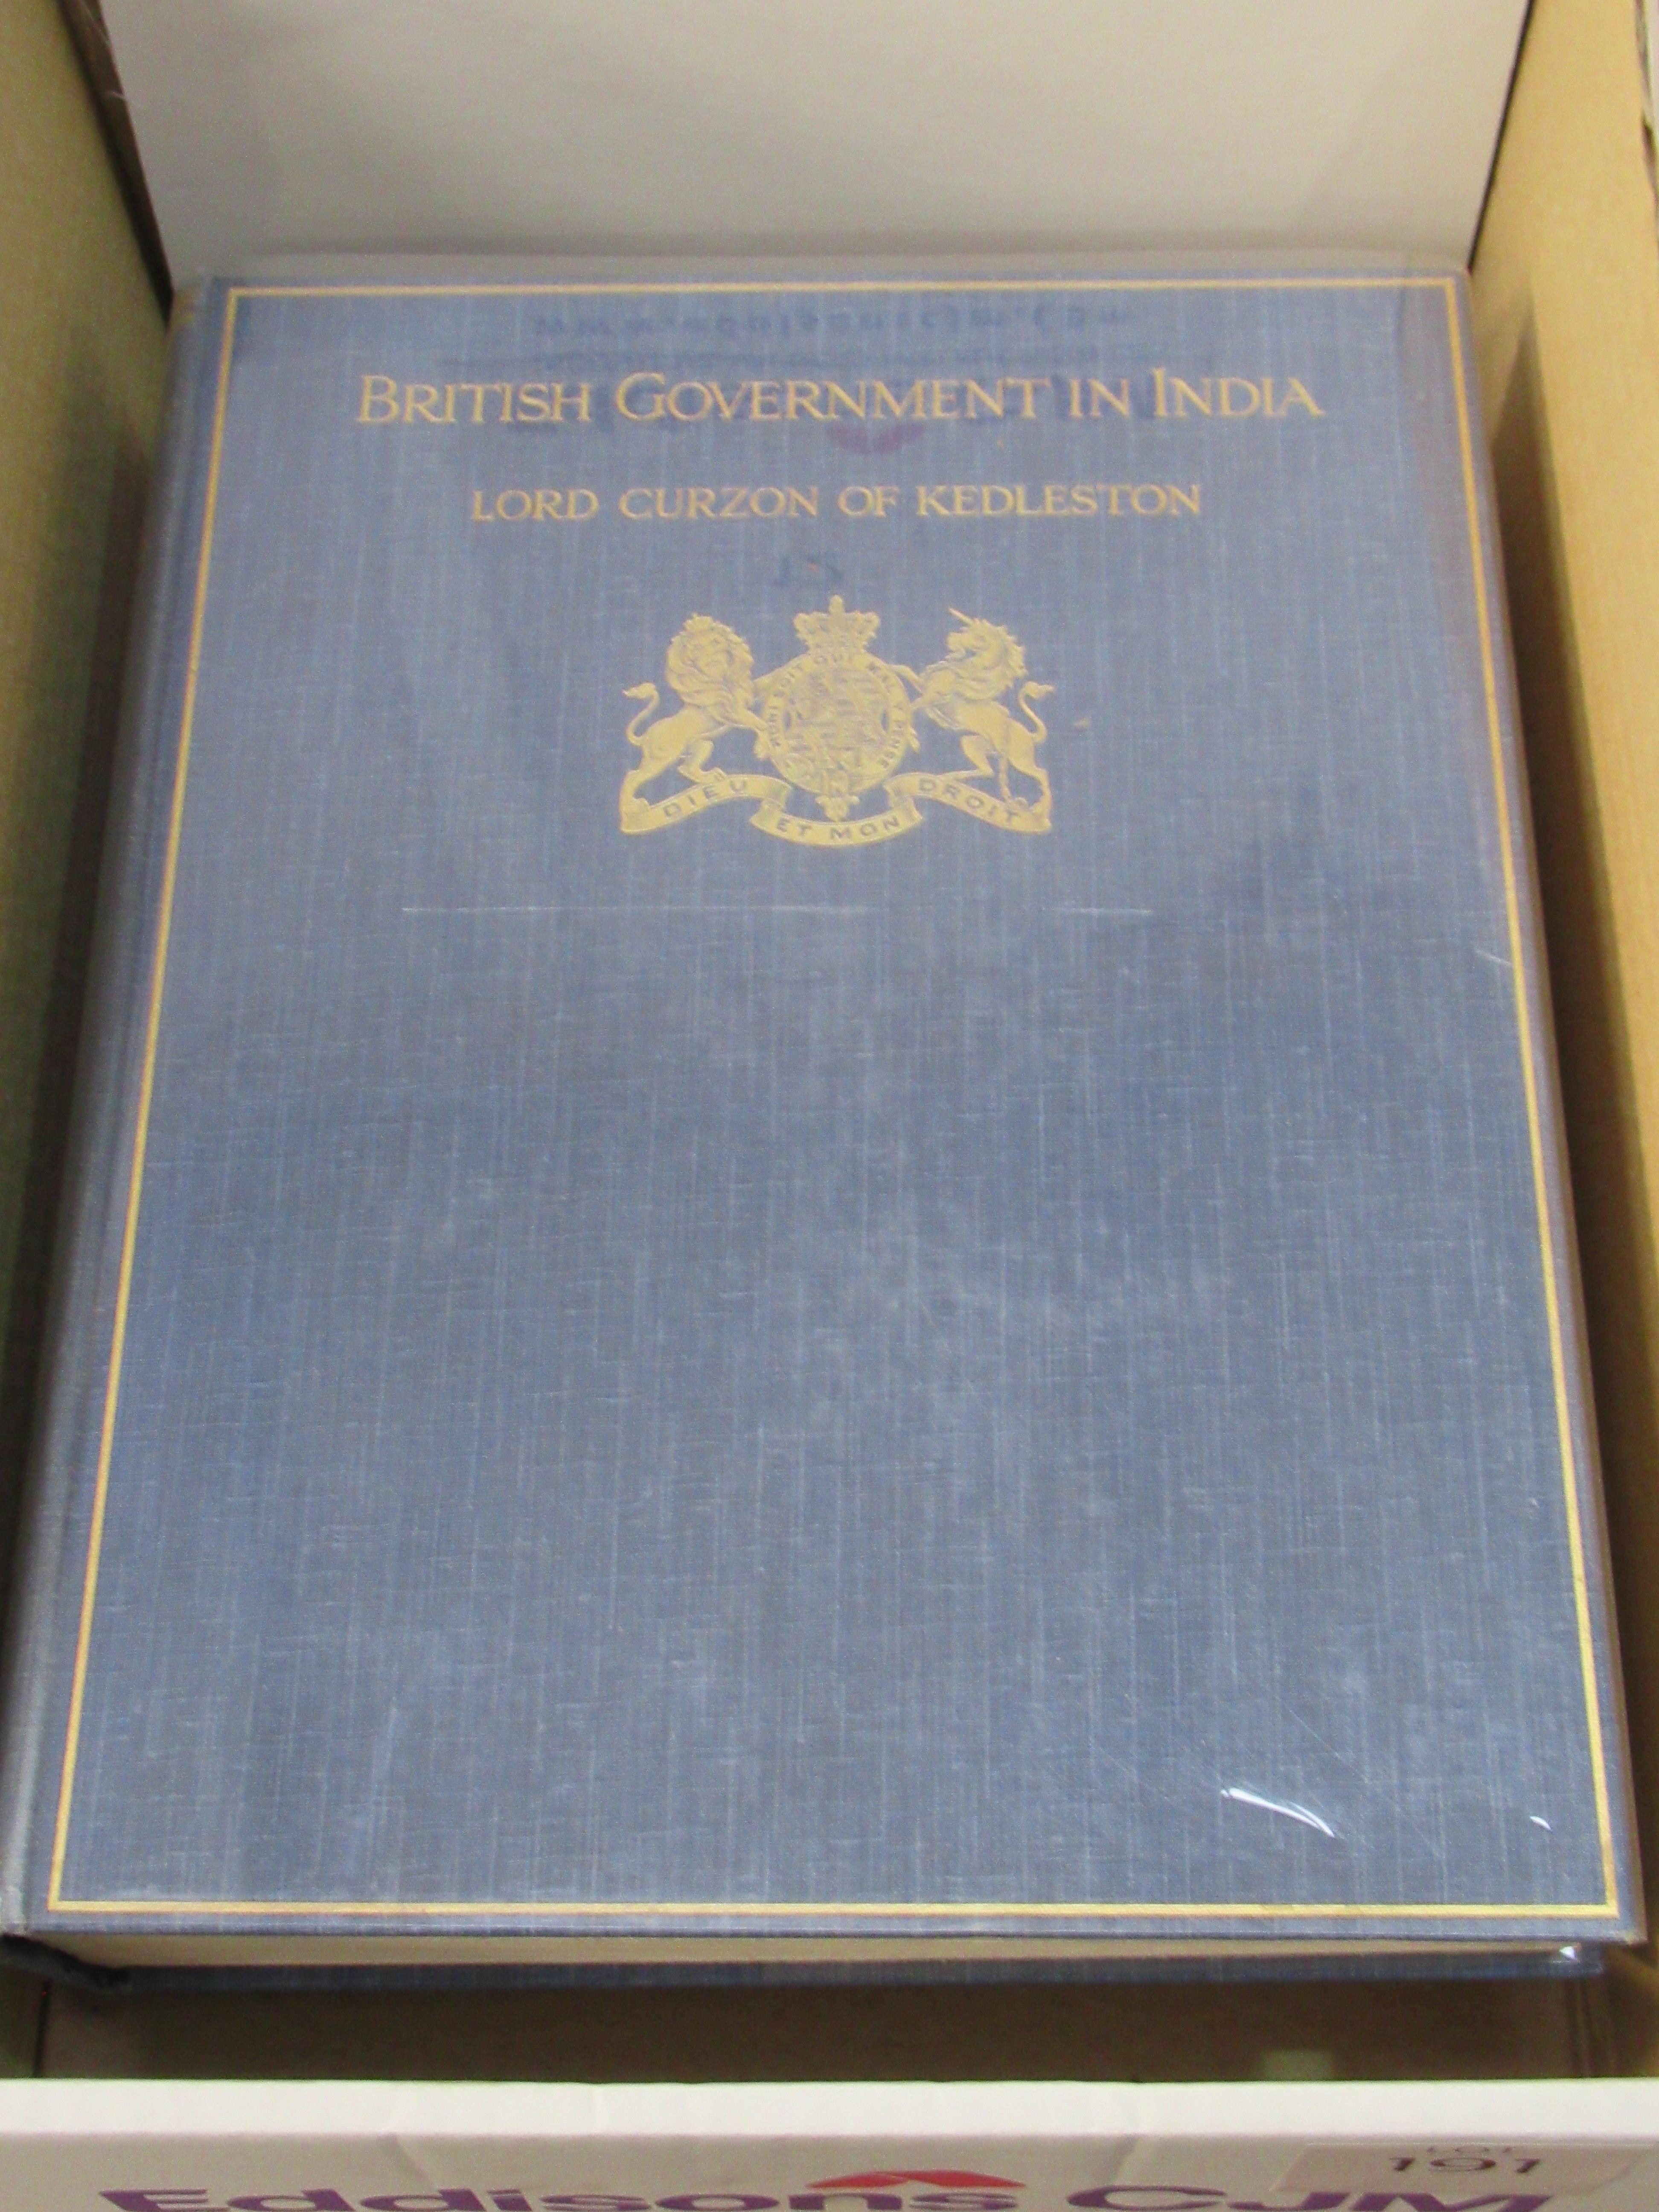 "British Government in India" Vols 1 & 2 by Lord Curzon of Keddlestone. First Published in 1925, Pub